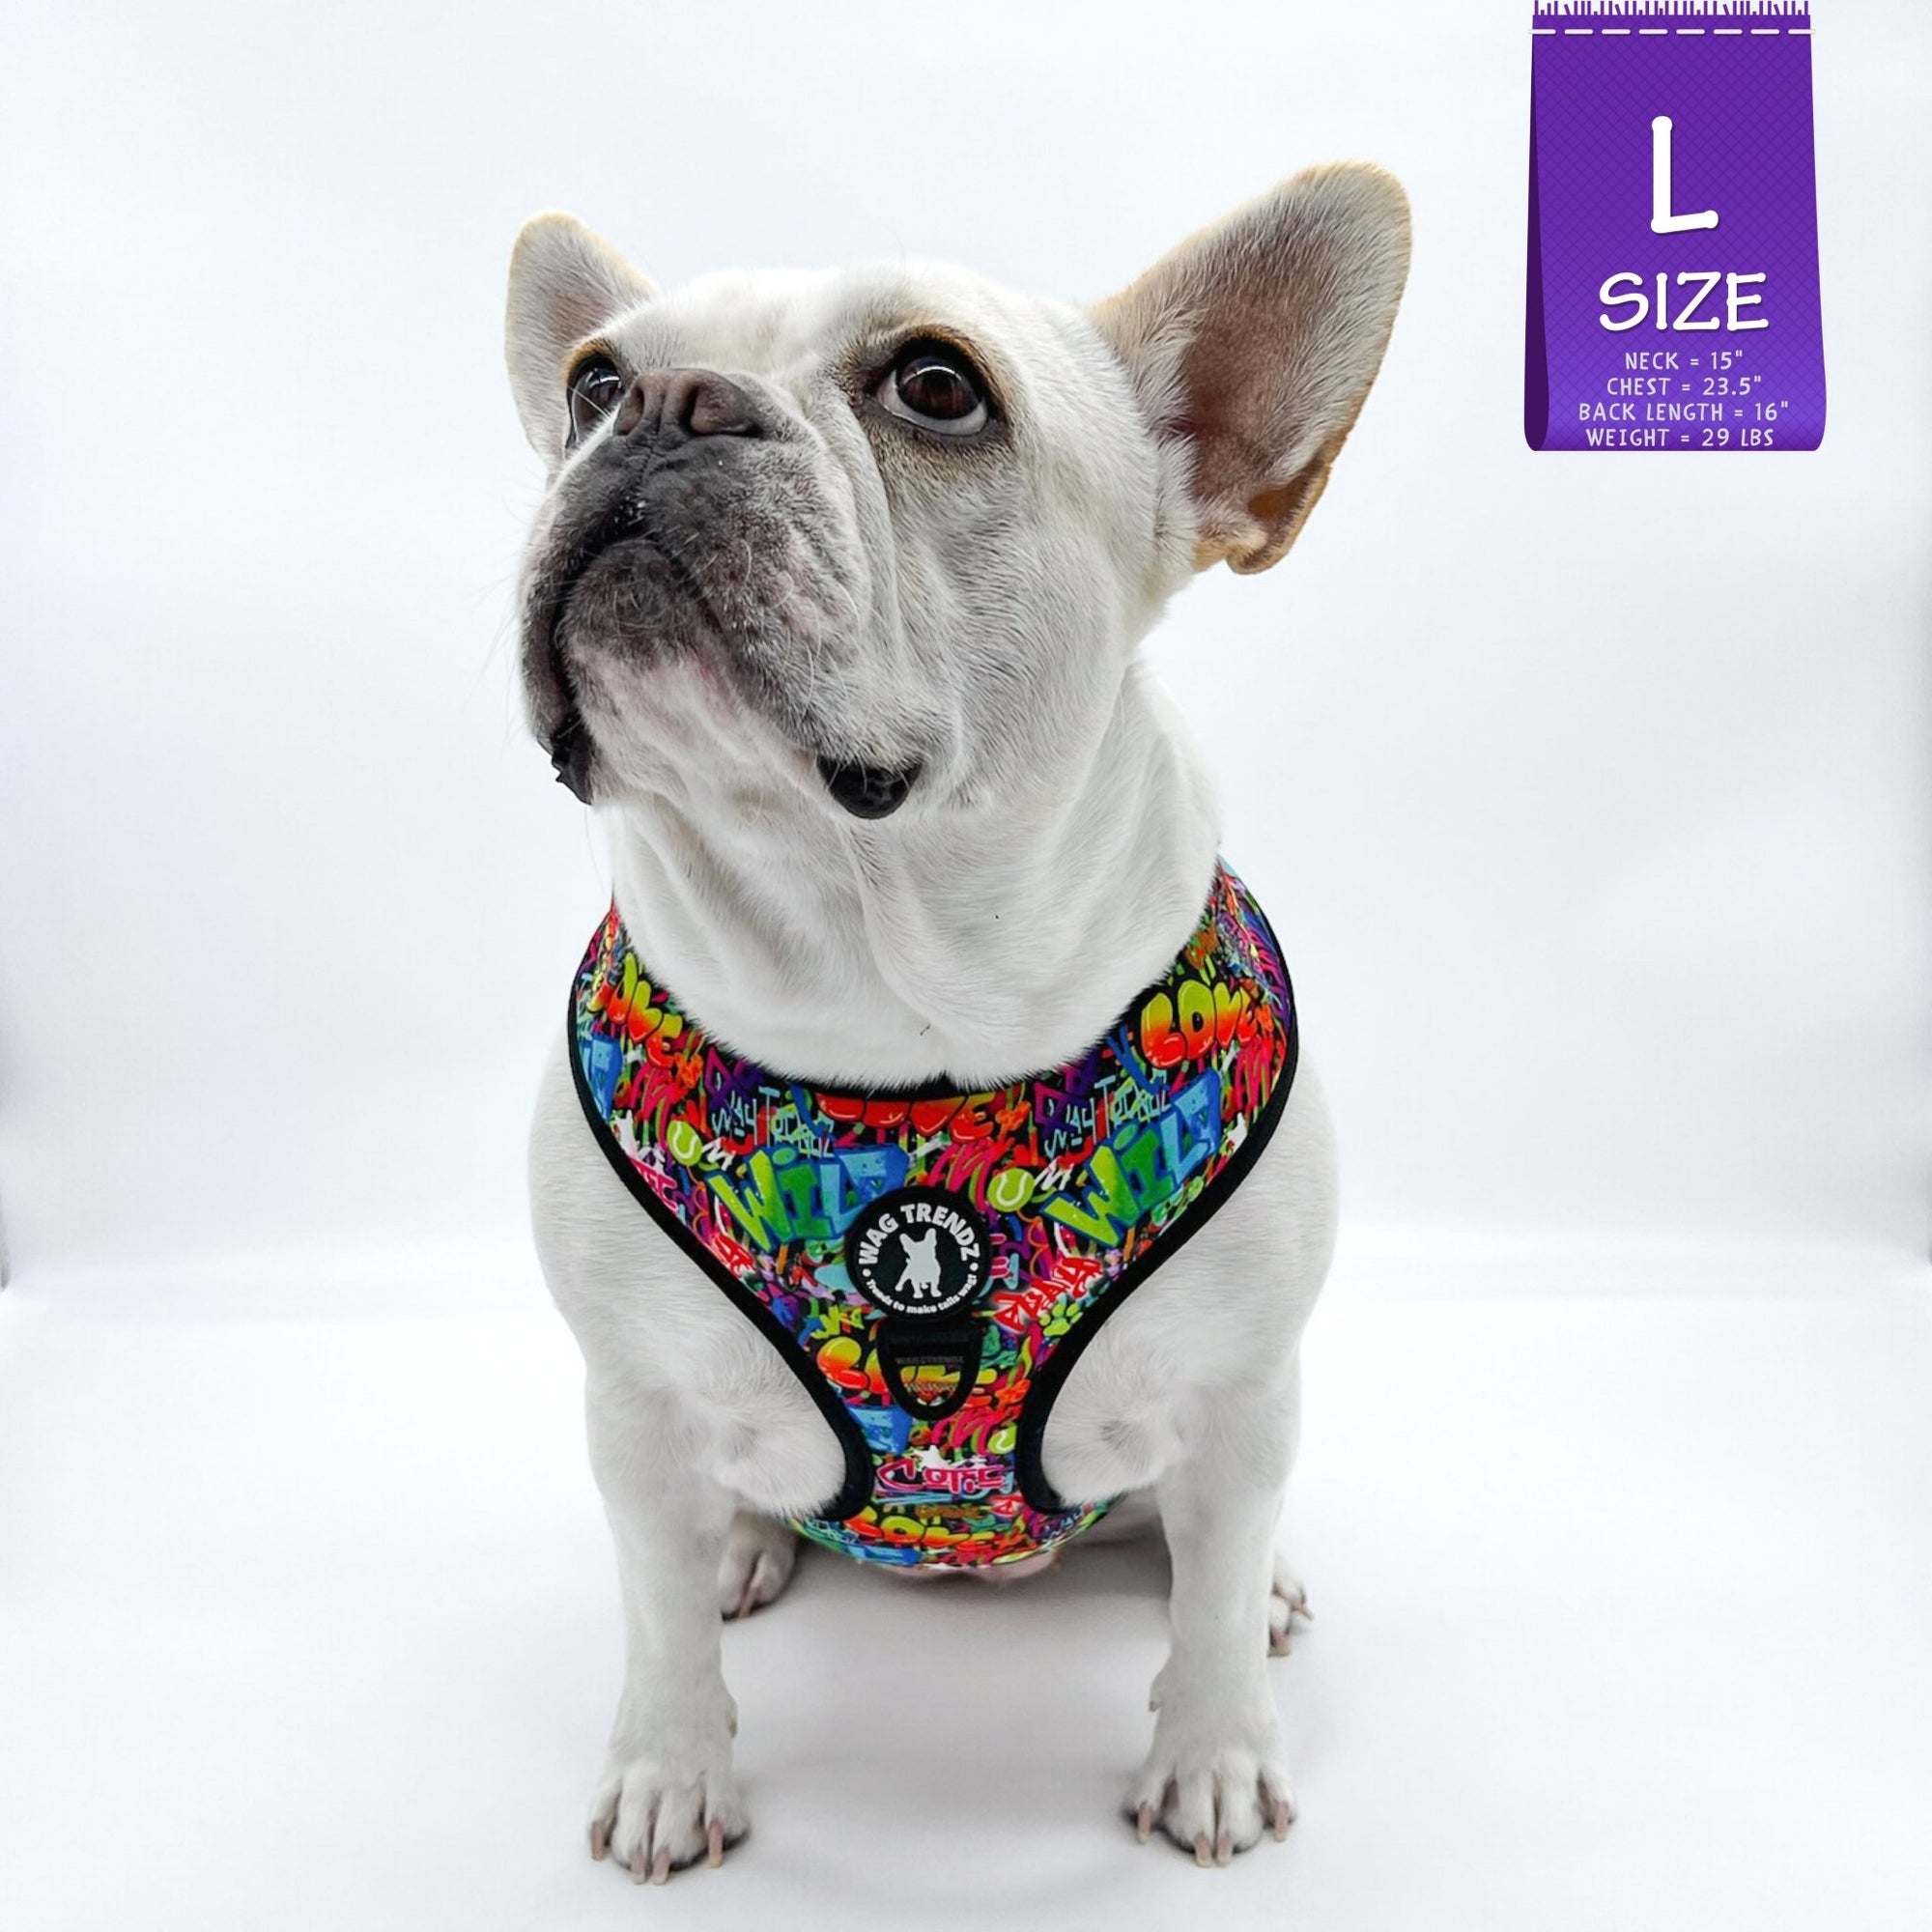 No Pull Dog Harness - Adjustable - Front Clip - worn by cute white Frenchie Bulldog - multi-colored street graffiti design against solid white background - front view - Wag Trendz